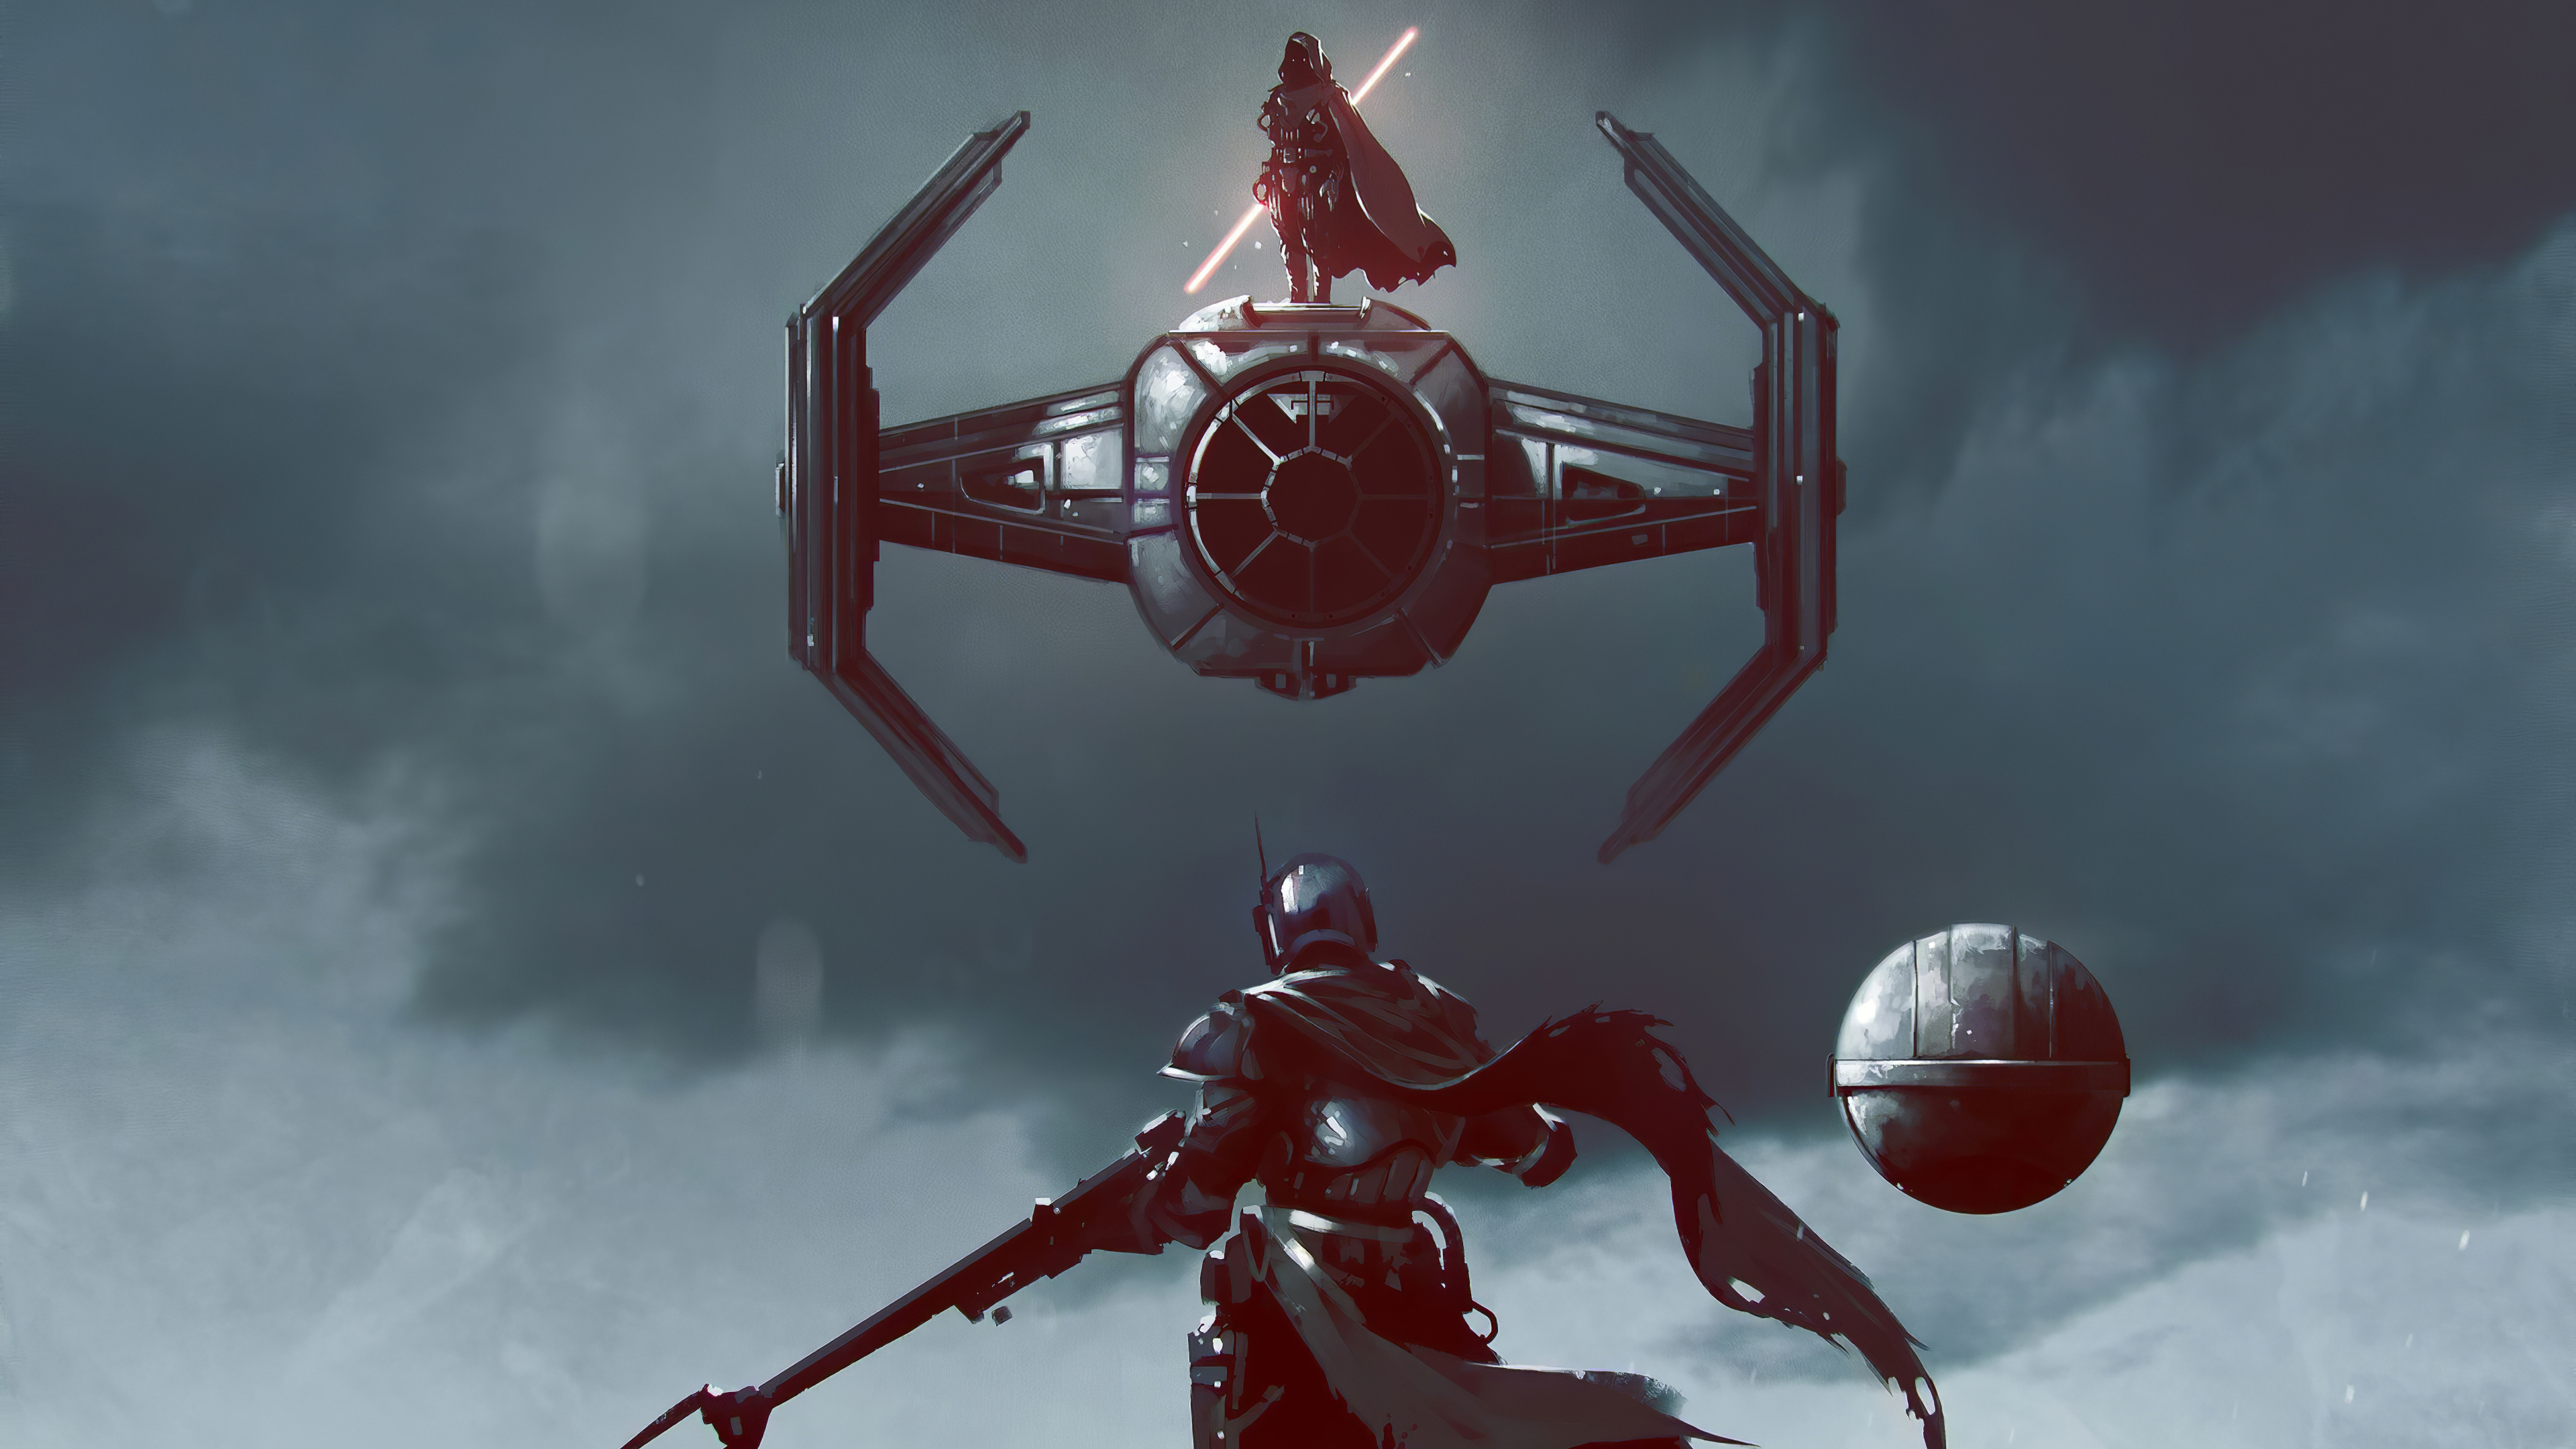 Wallpaper  video games vehicle artwork TIE Fighter Star Destroyer  universe X wing Death Star star wars empire at war screenshot  1920x1080 px computer wallpaper special effects outer space 1920x1080   wallhaven 